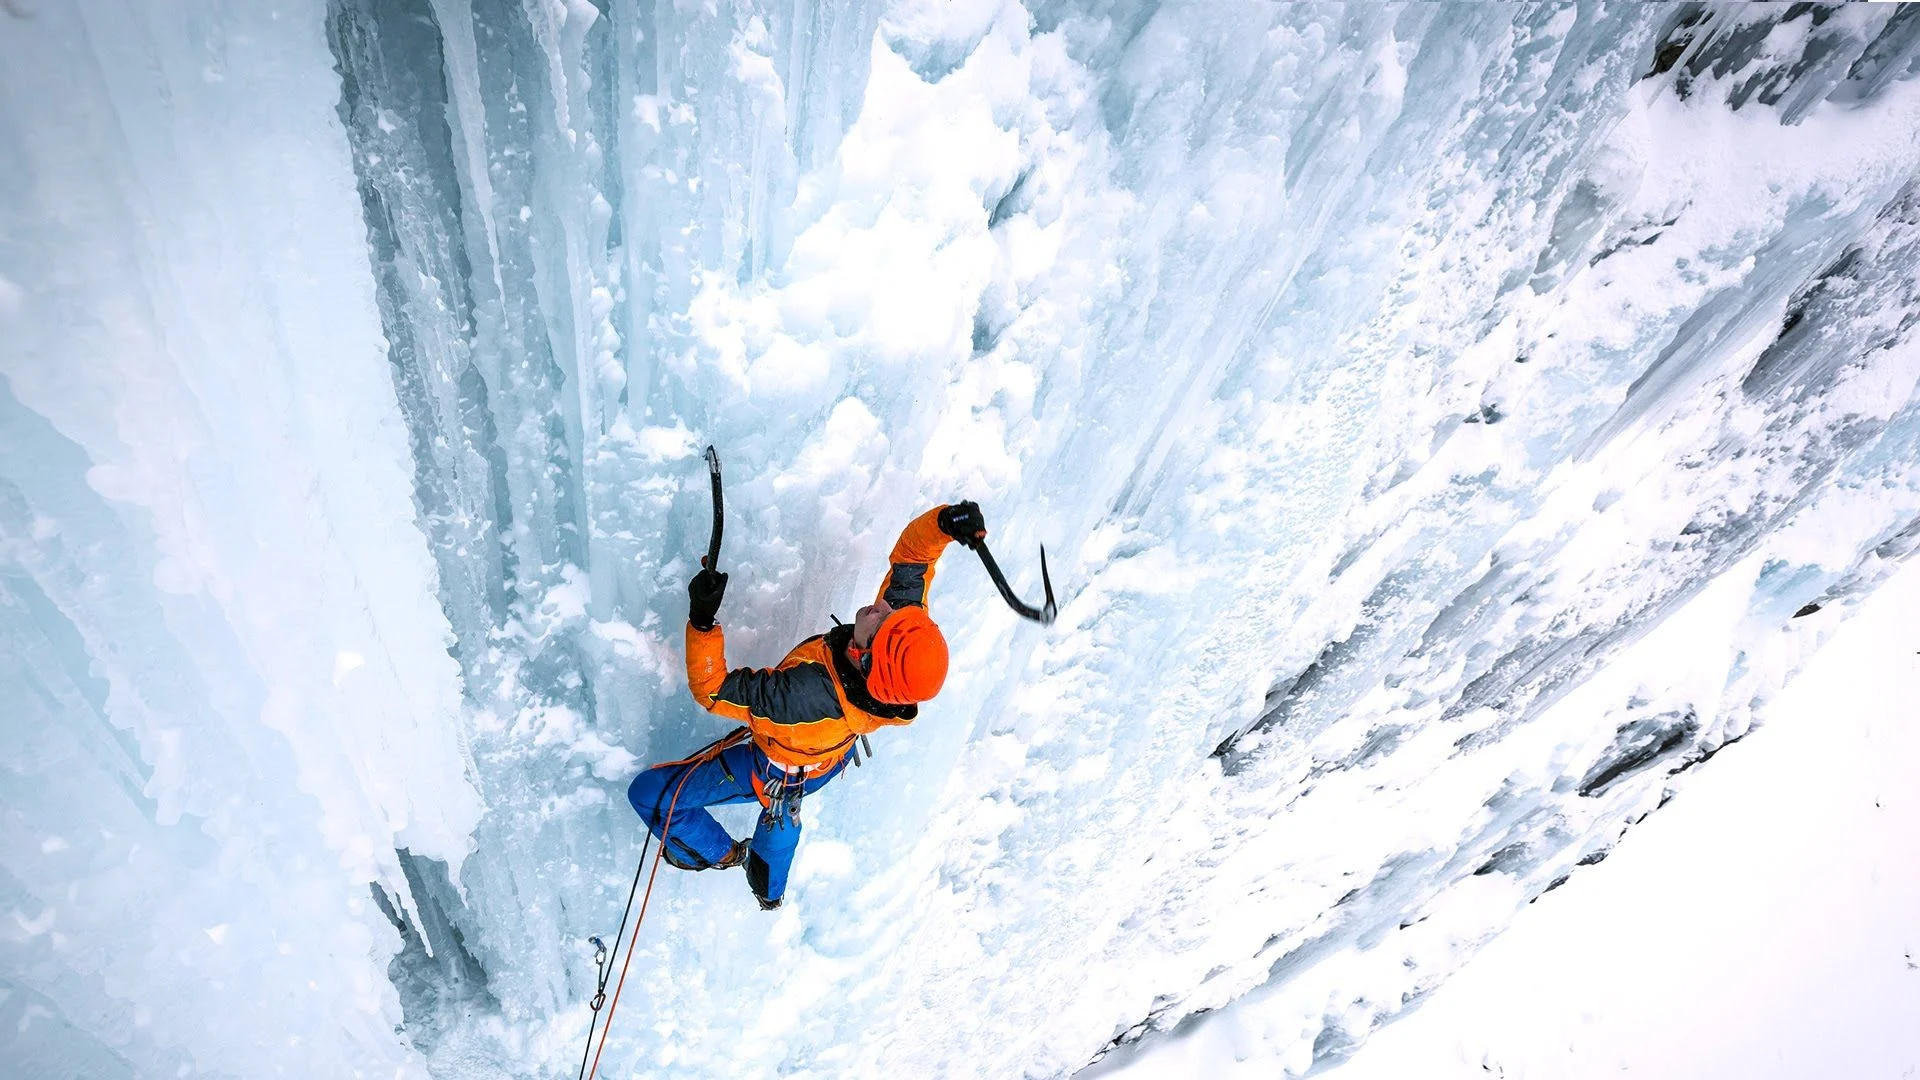 Ice Climbing: Petzl Equipment For Sports Enthusiasts And Professionals, Training In Ouray, Colorado. 1920x1080 Full HD Wallpaper.